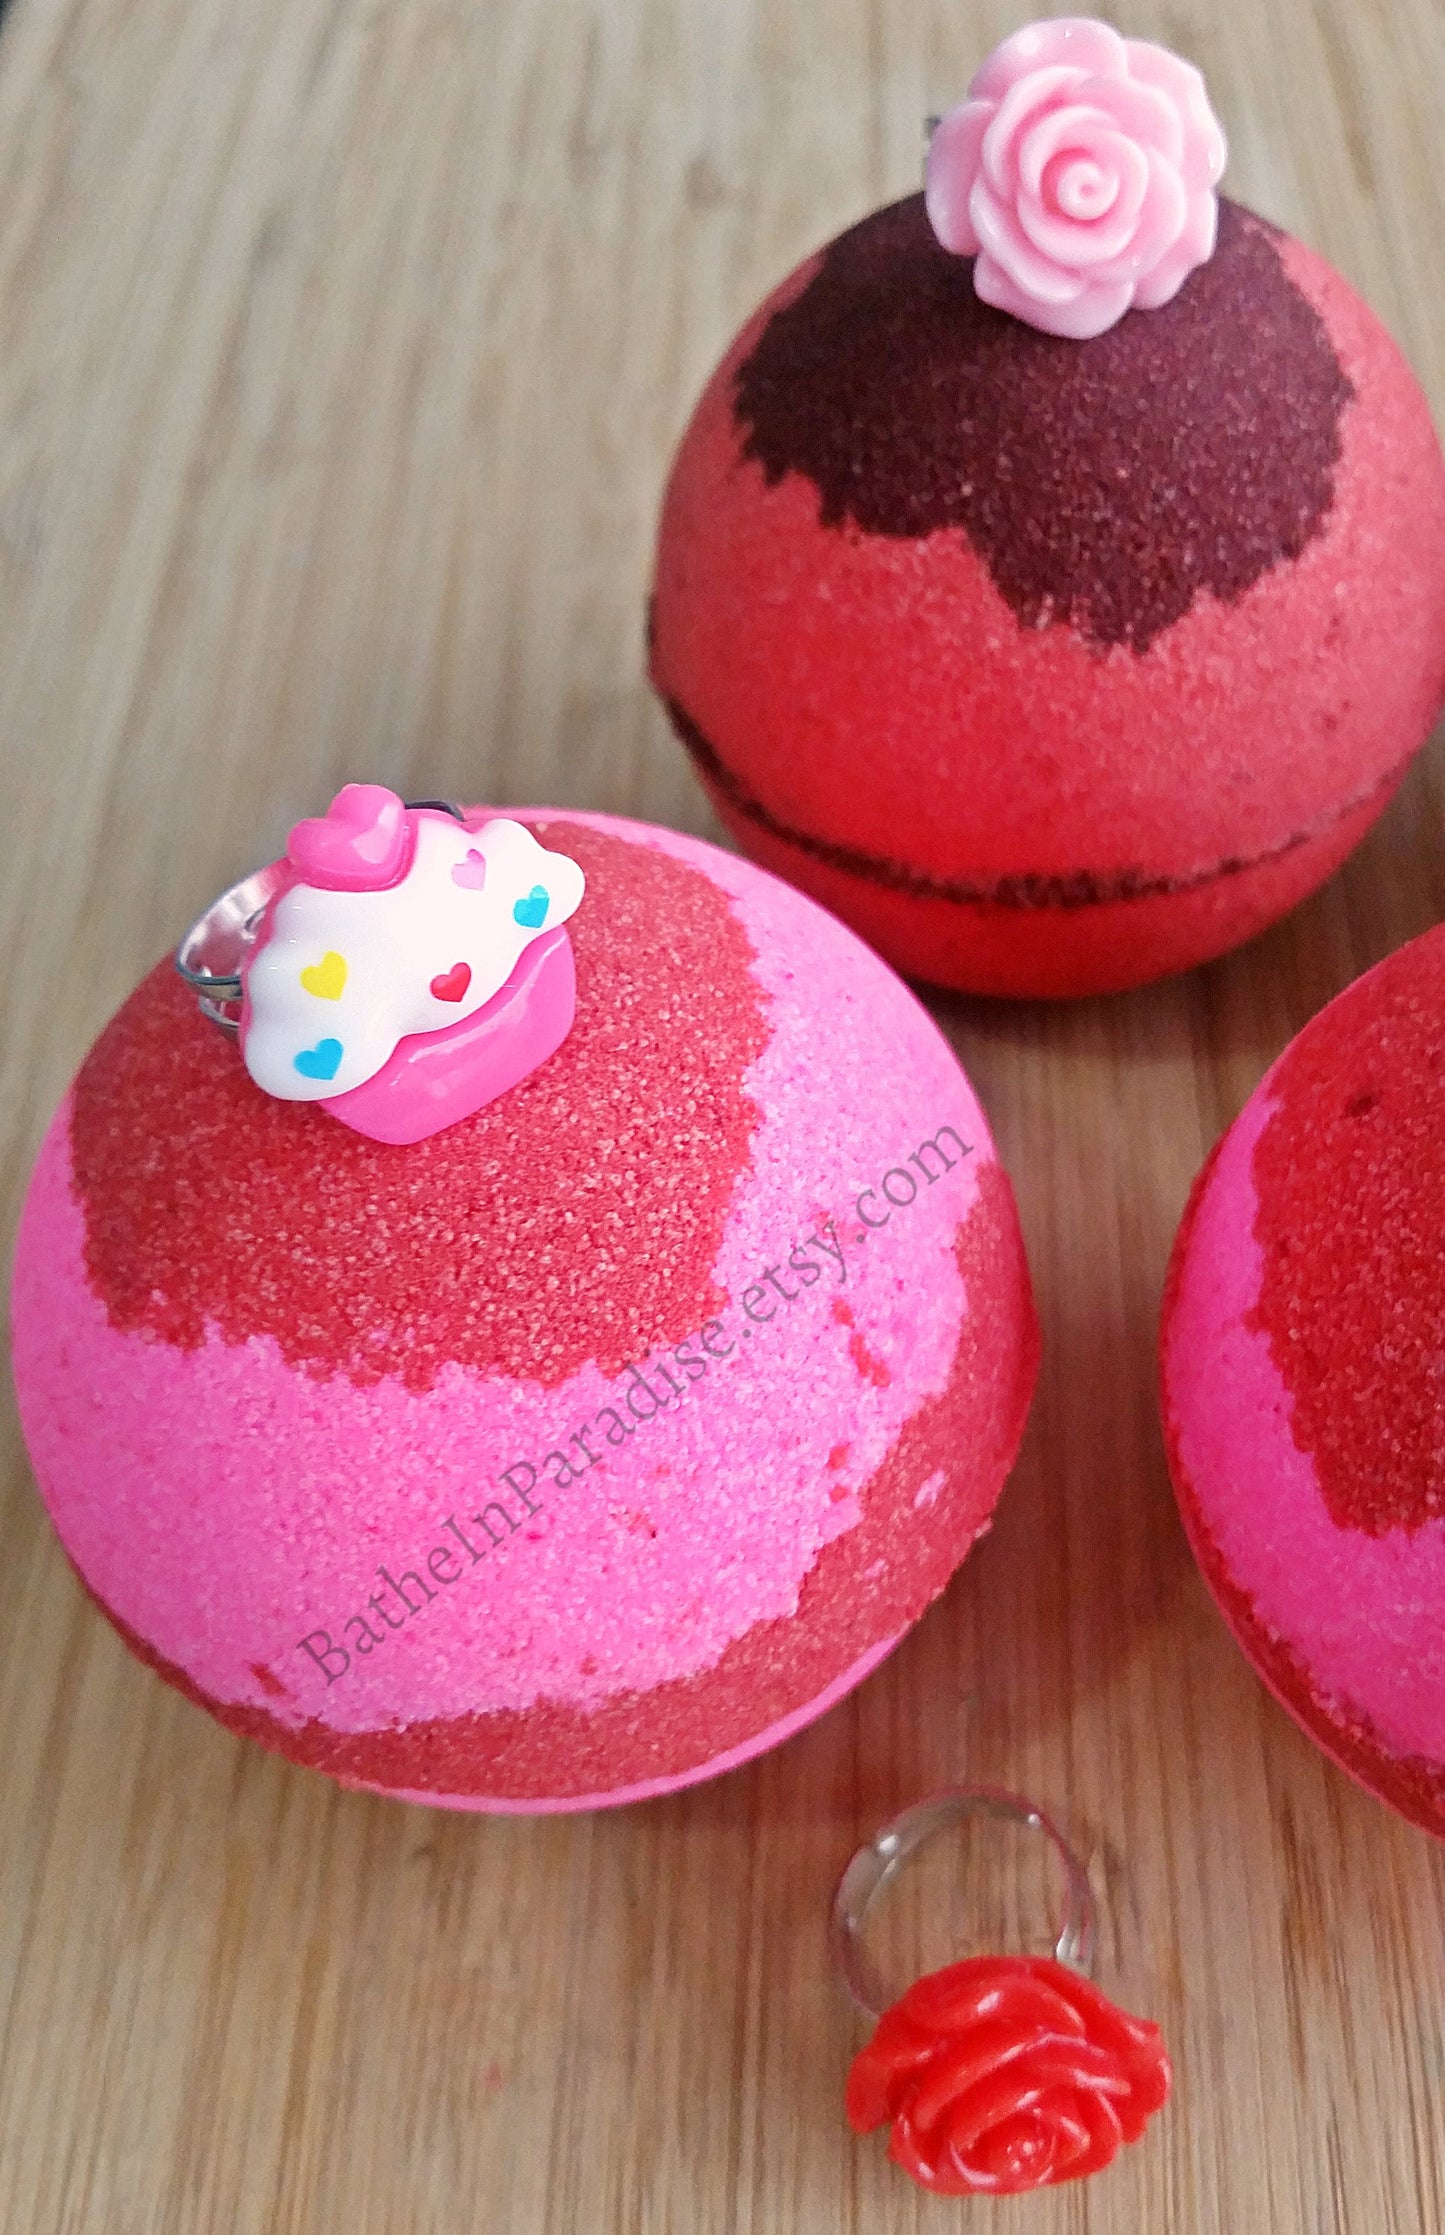 Ring Bath Bomb (1) | Children's Size Ring | Surprise Toy Ring Inside Fizzy | Cherry Scent